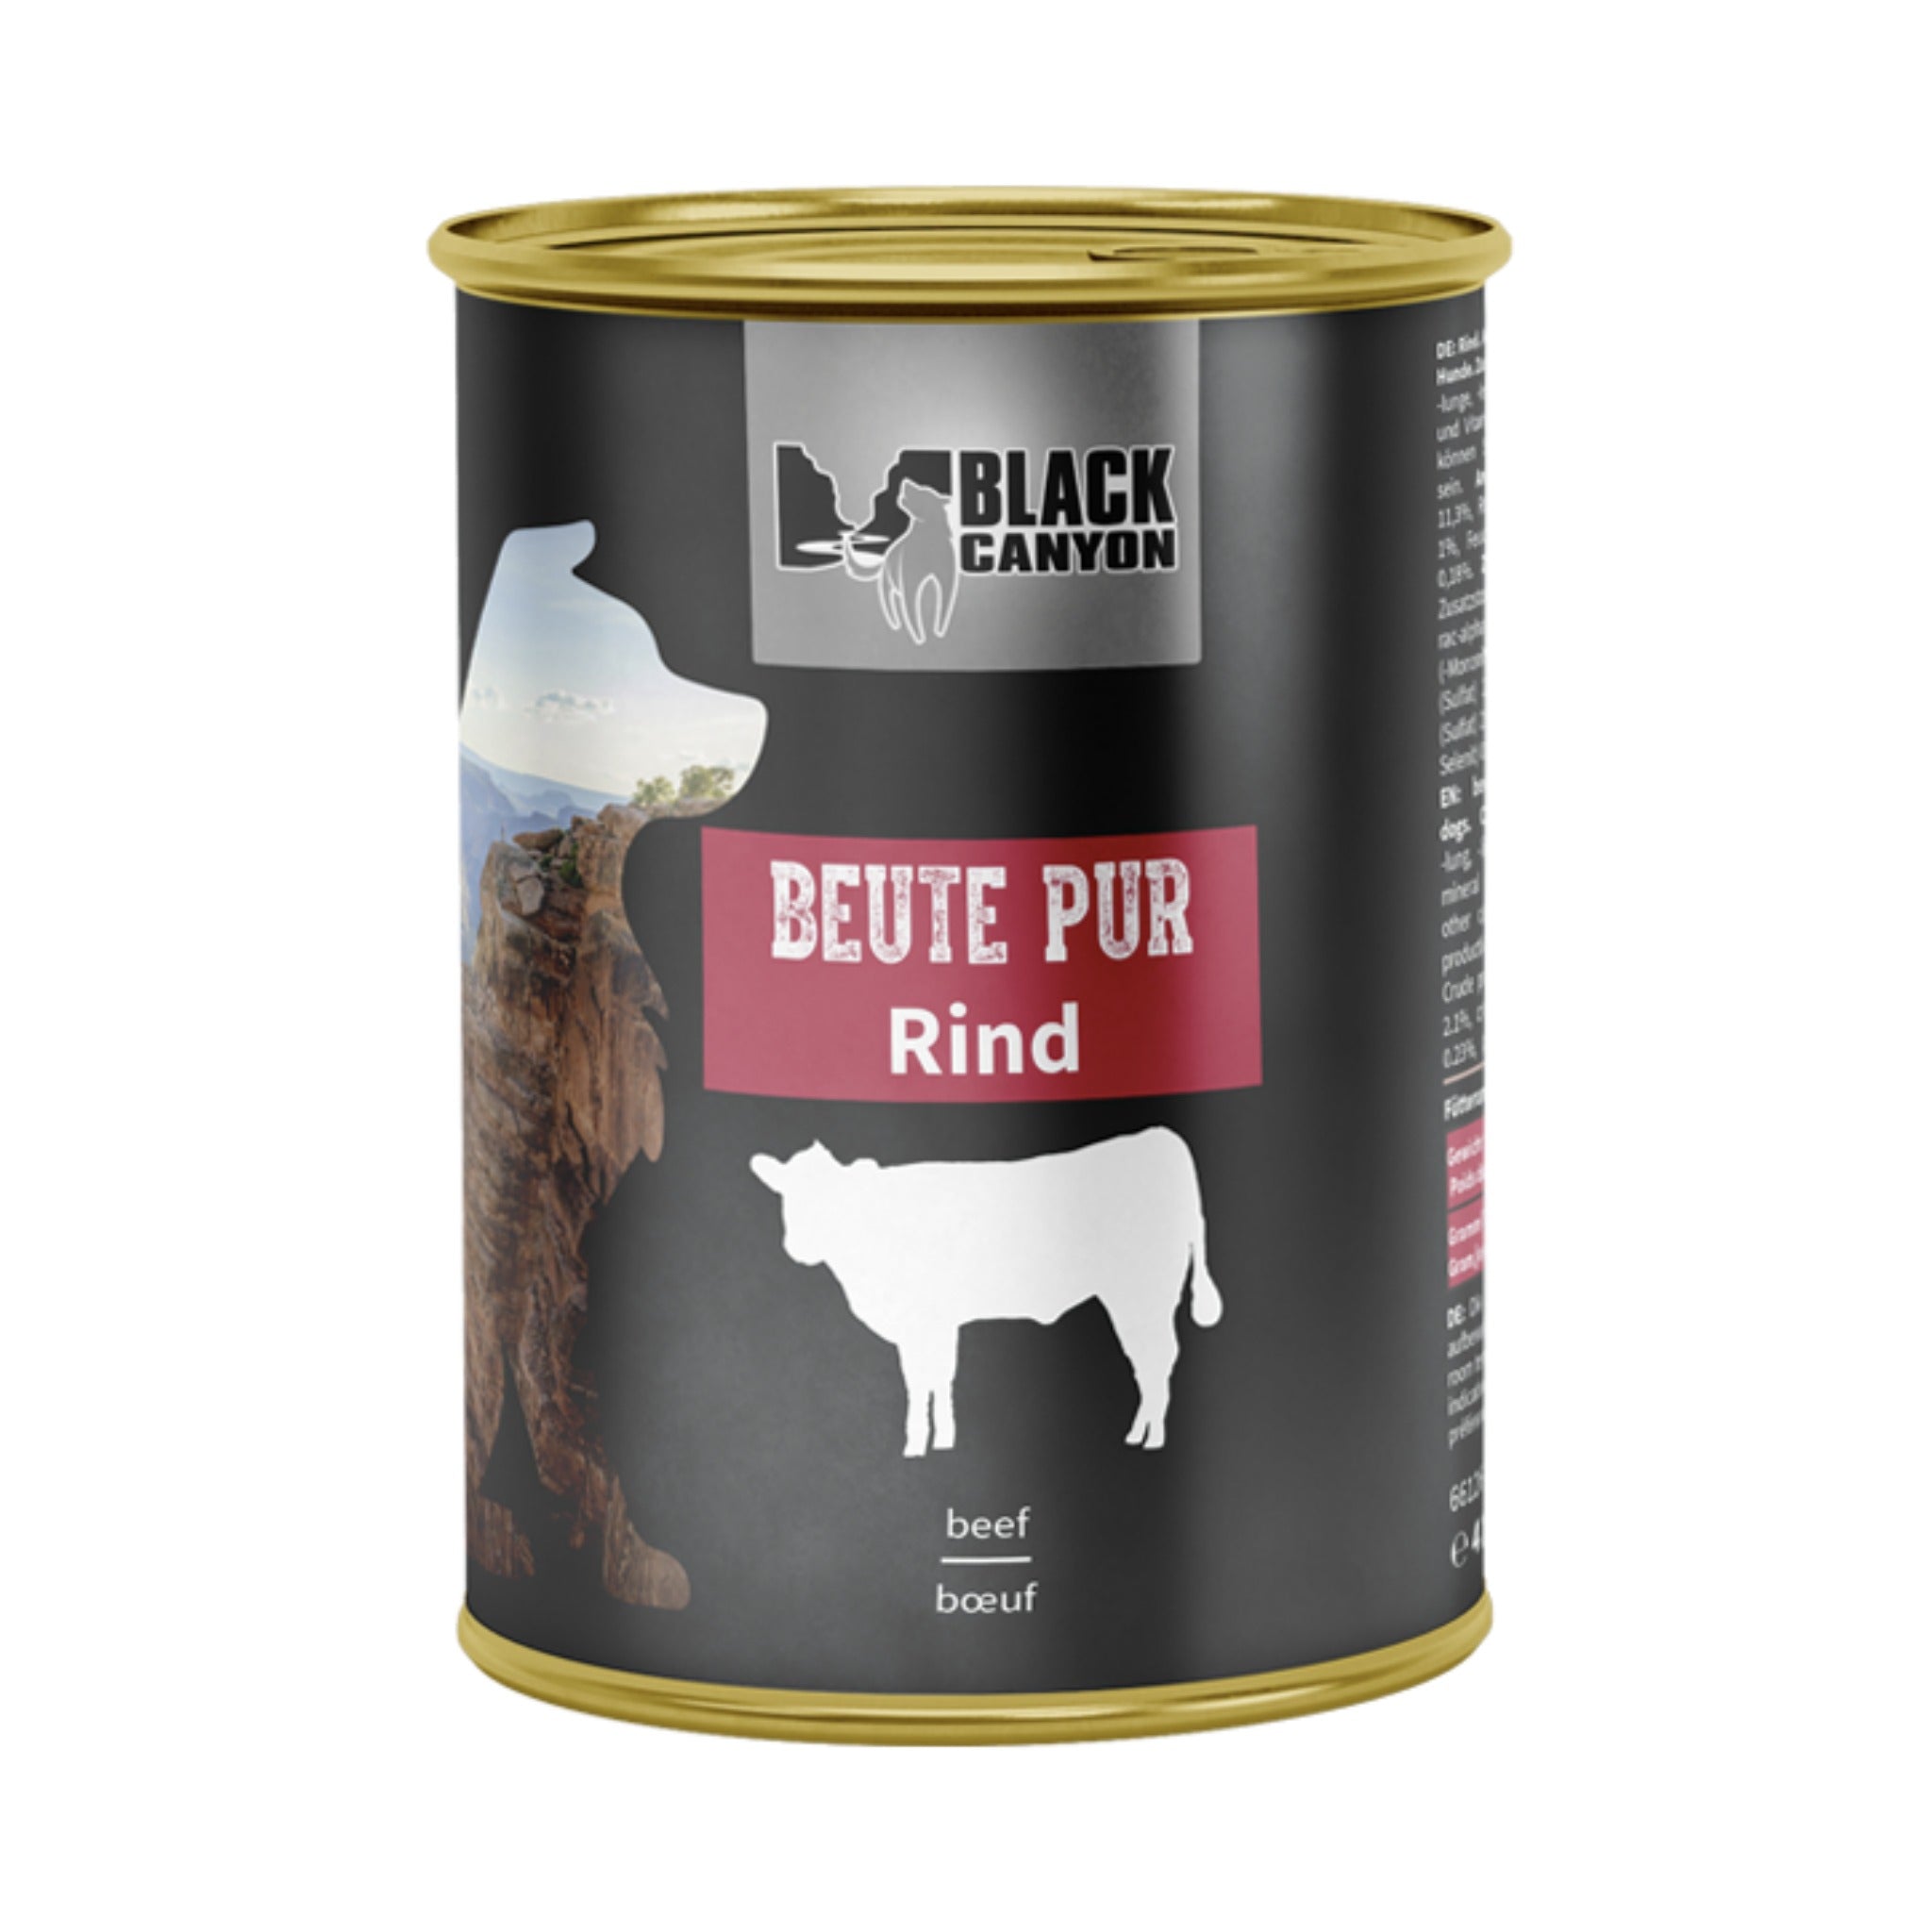 Black Canyon Beute Pur - Rind, Hunde Nassfutter - Woofshack